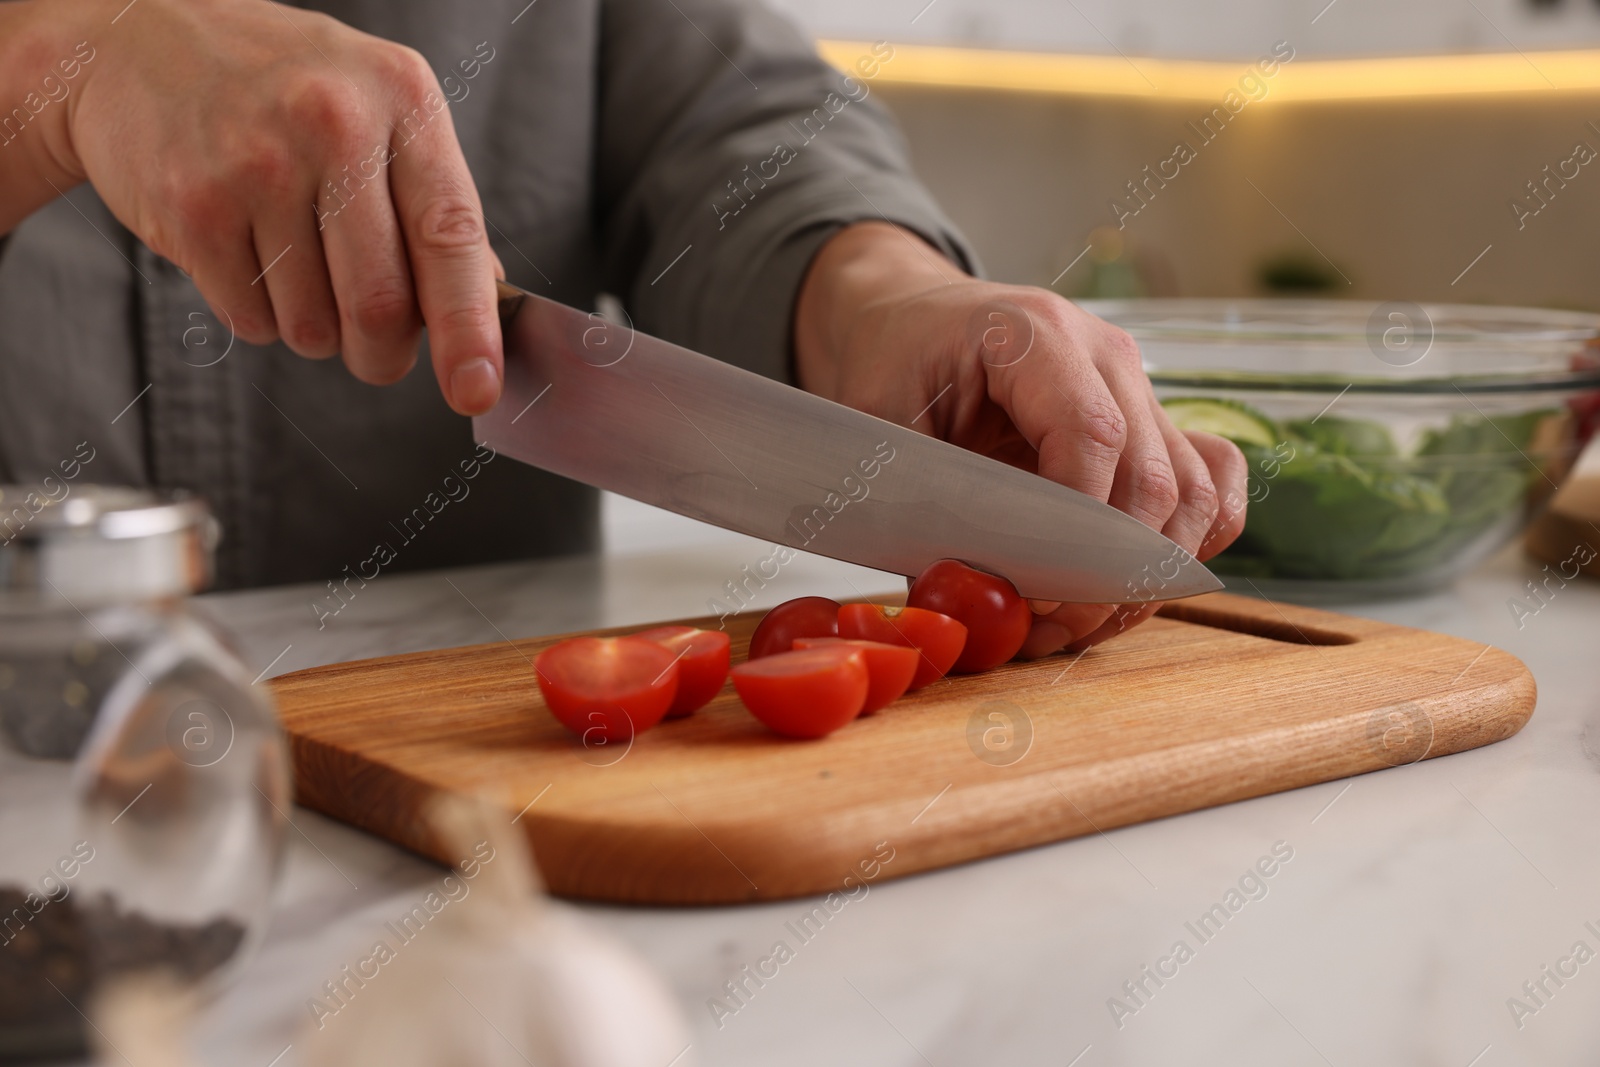 Photo of Cooking process. Man cutting fresh tomatoes at white marble countertop in kitchen, closeup